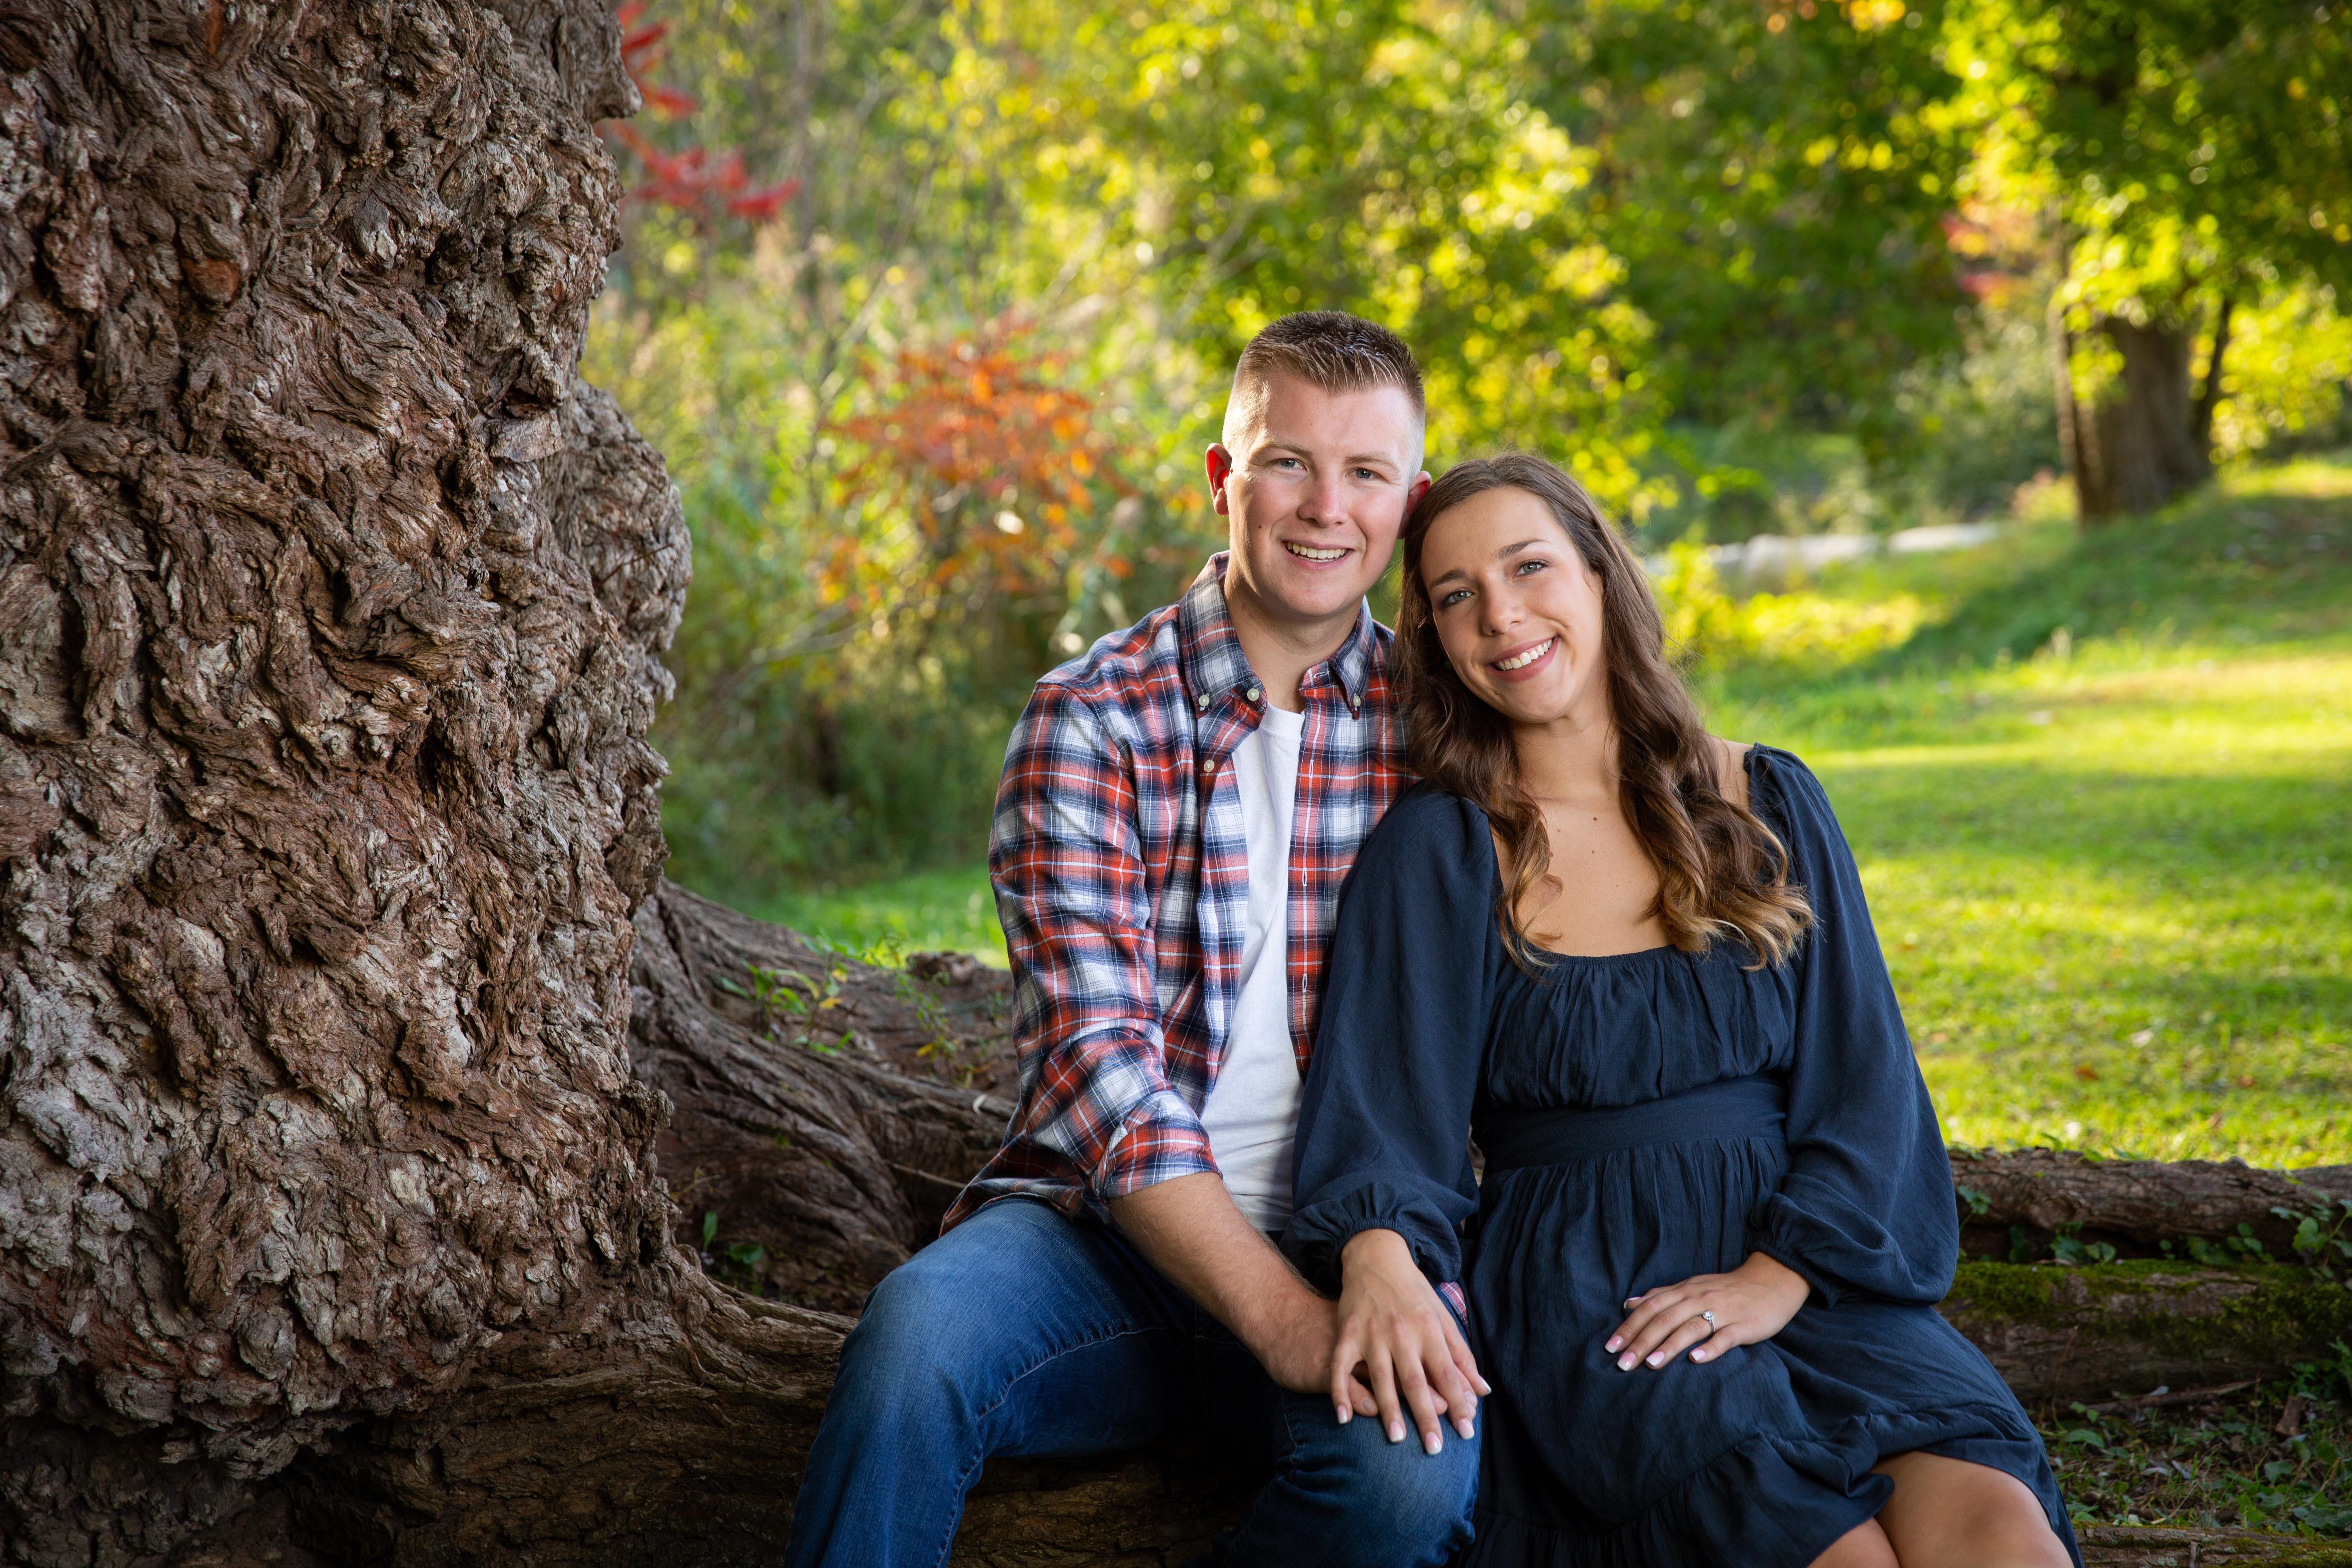 The Wedding Website of Tracie Murphy and Kevin Niver